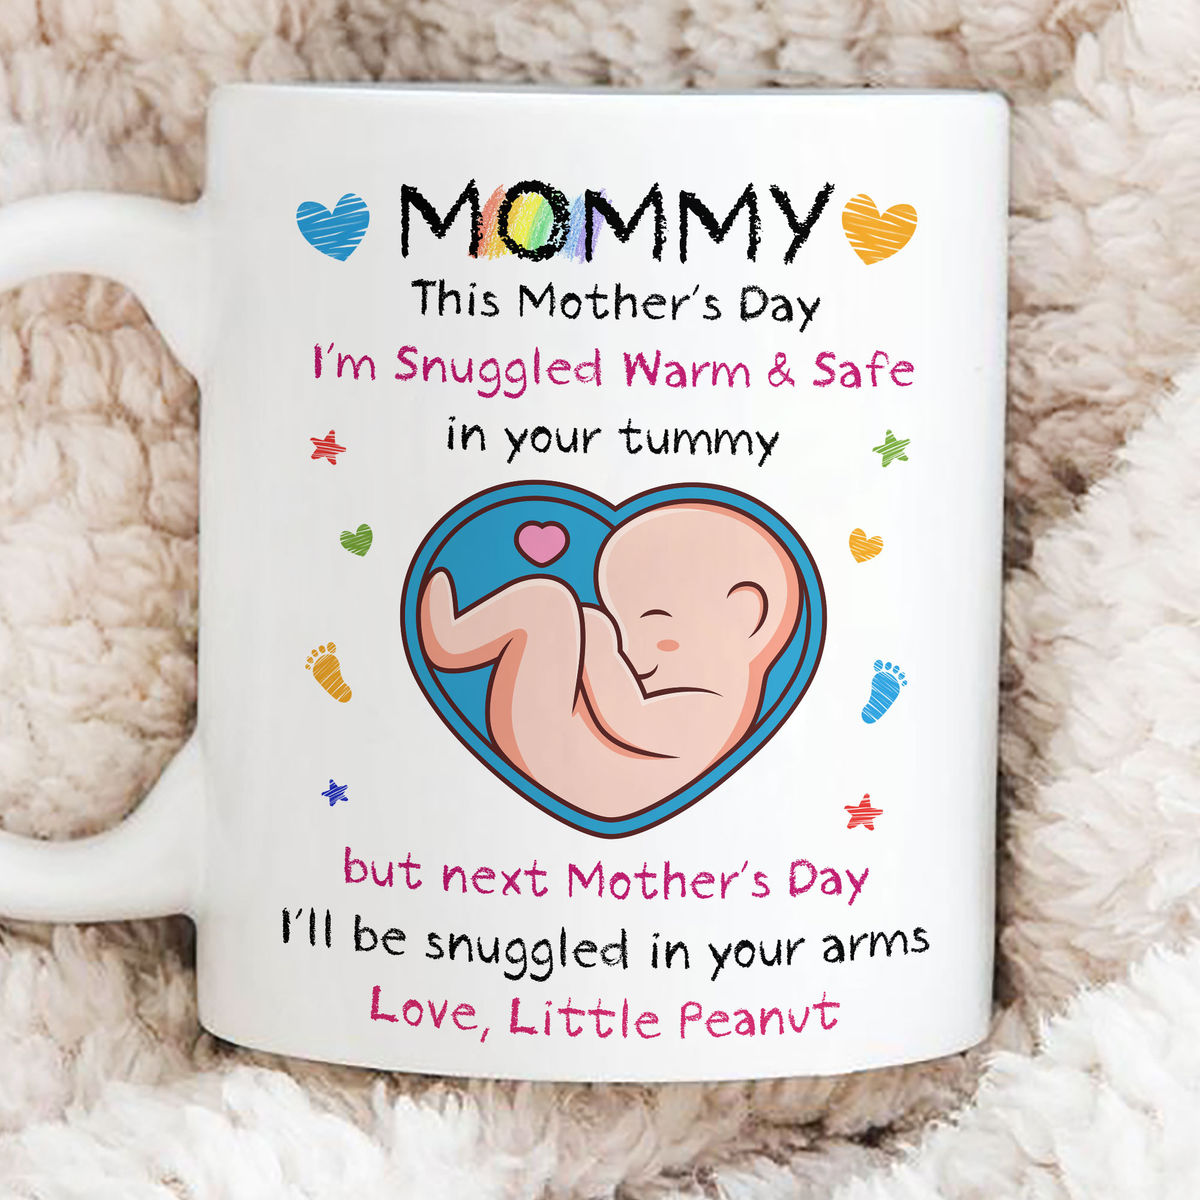 From The Bump - Mommy, This Mother's Day I'm Snuggled Warm & Safe In Your Tummy. But next Mother's Day, I'll be Snuggled in your arms (v2) - Personalized Mug_3